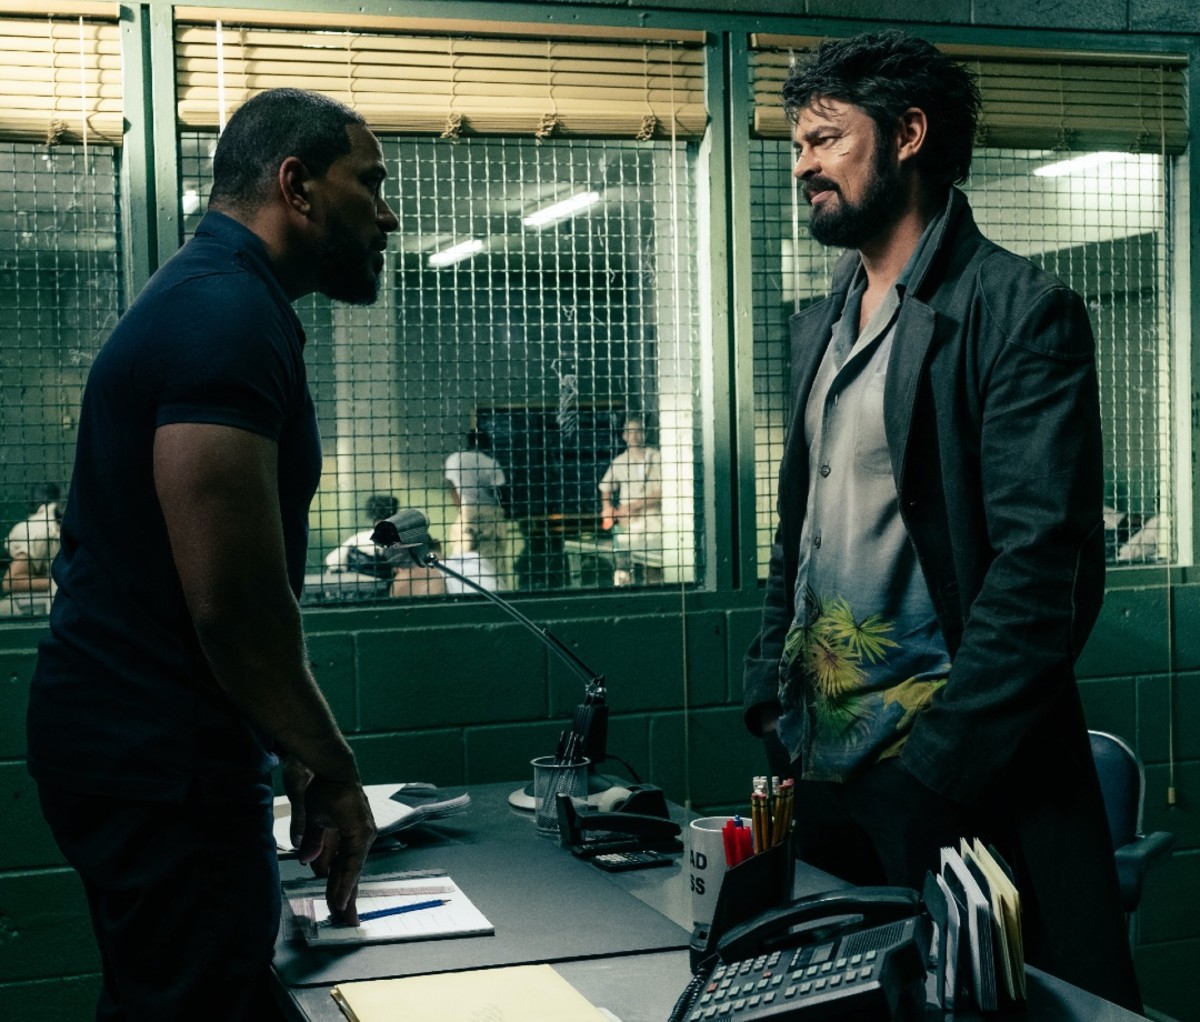 Laz Alonso and Karl Urban on set of 'The Boys'